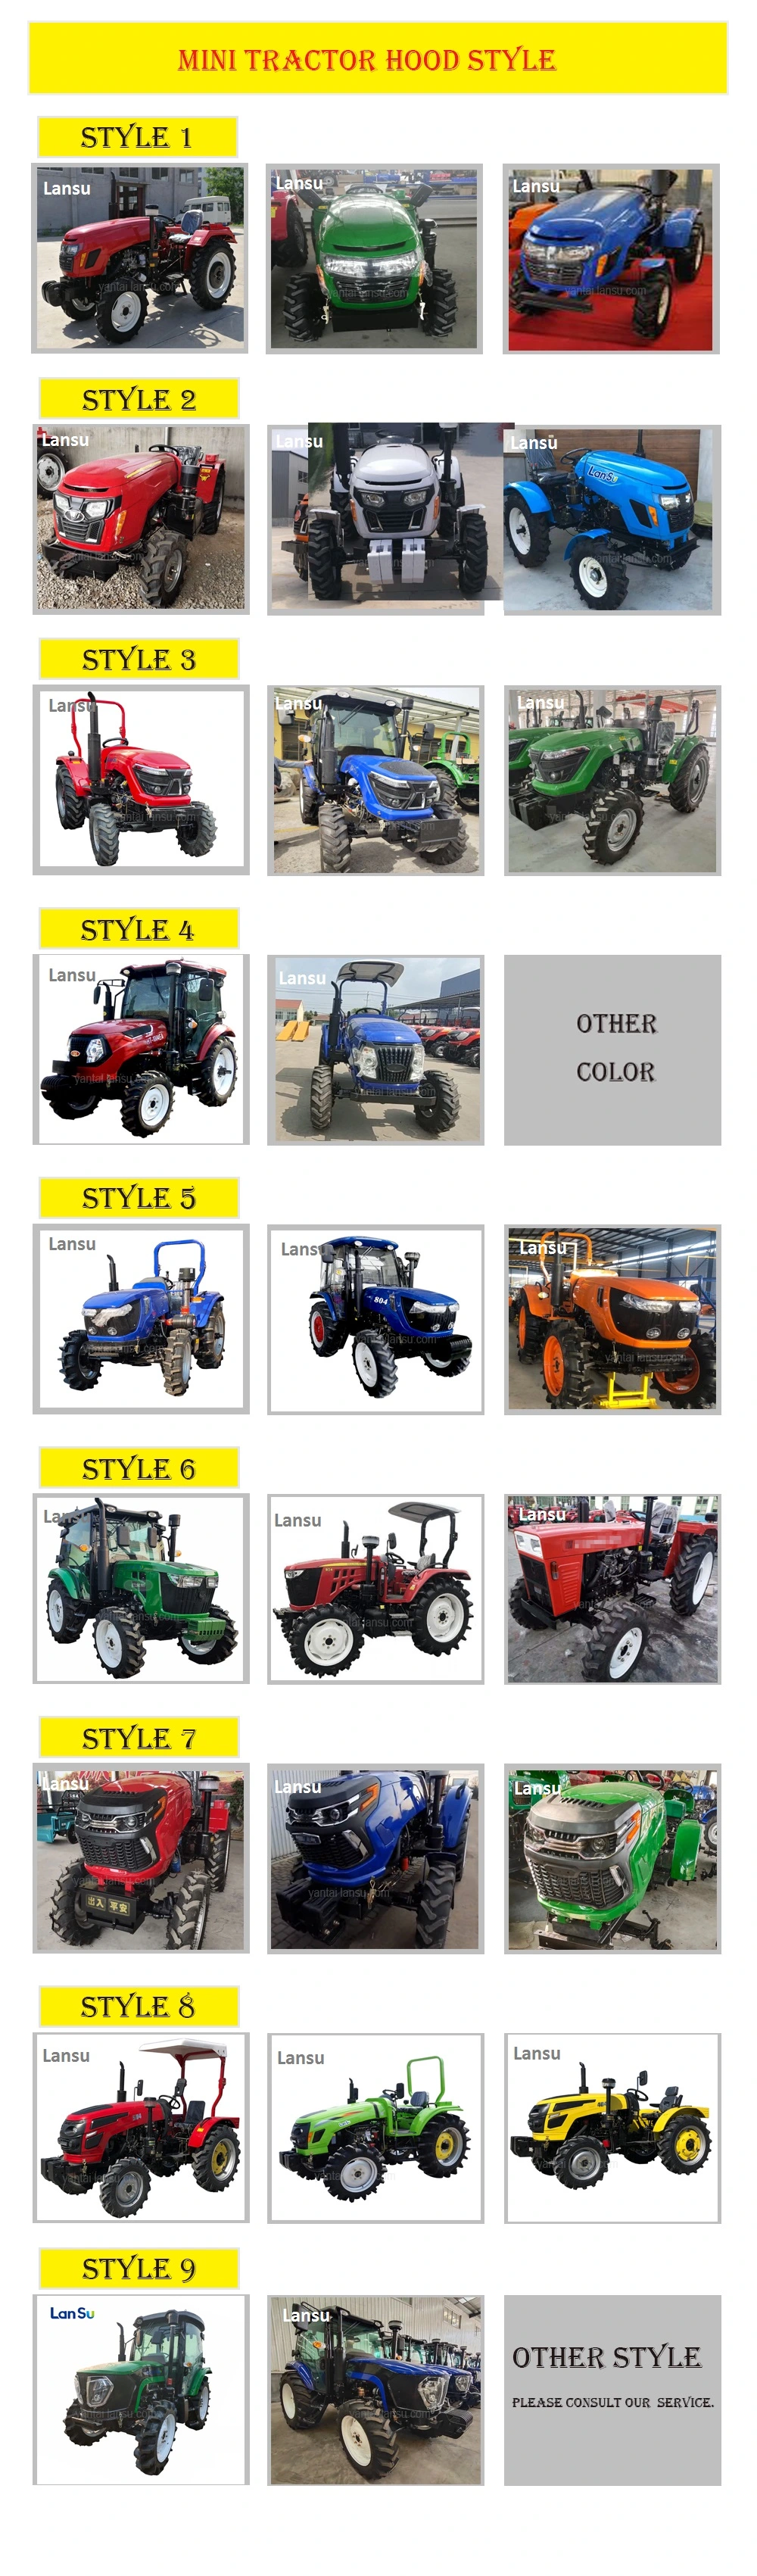 China Good Quality 4 Wheel Tractor Agricultural Farm Tractor